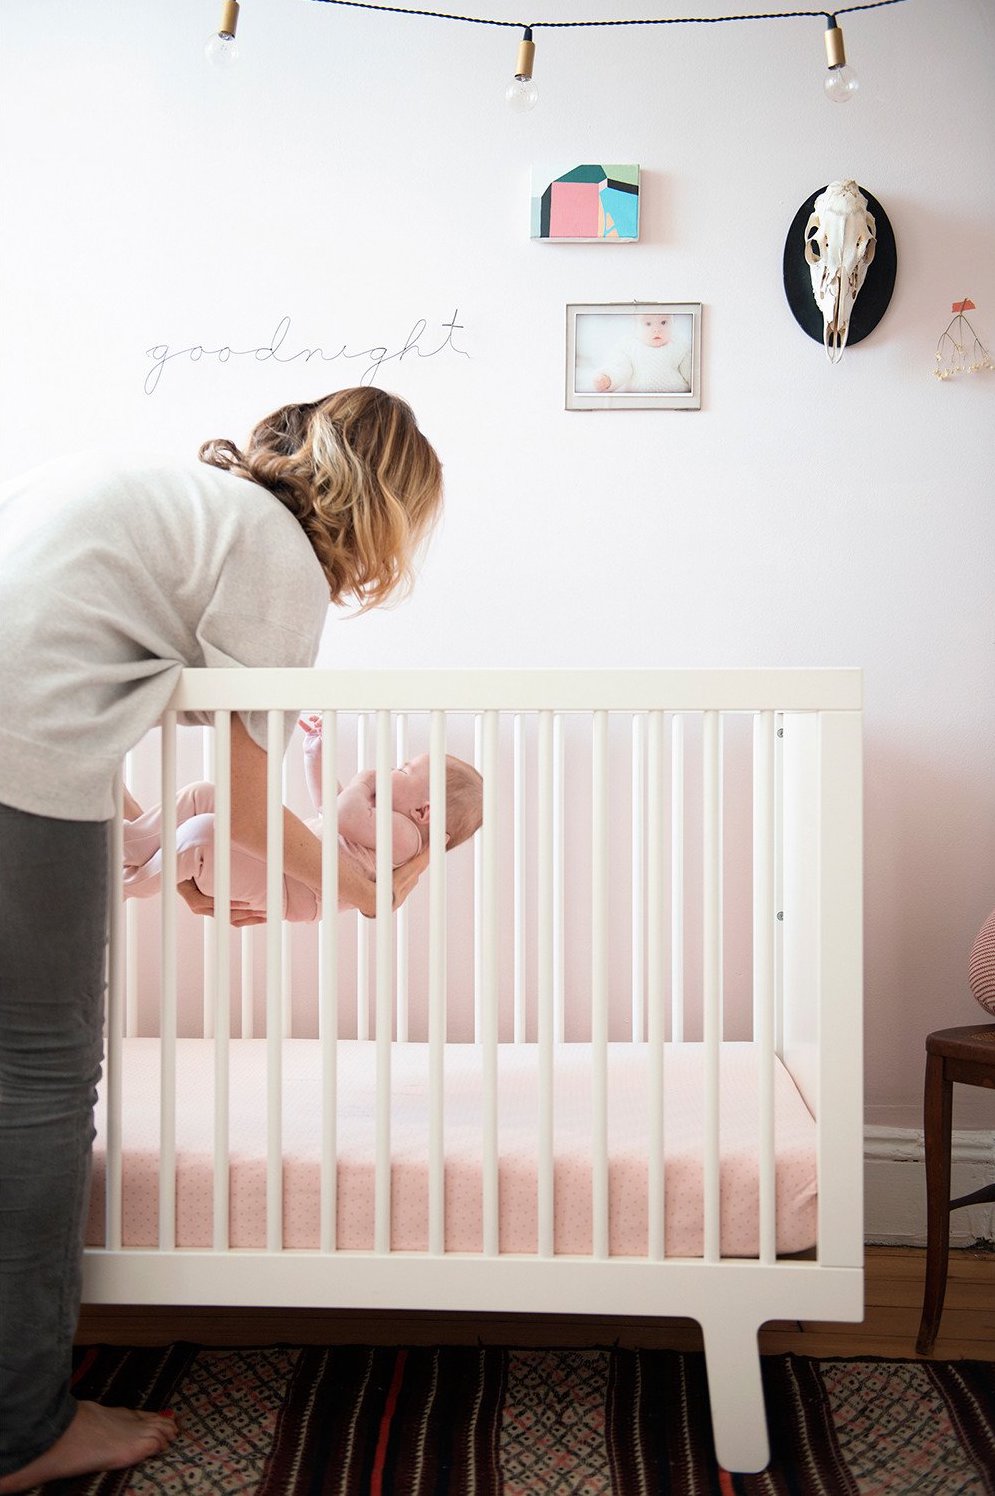 Putting a baby in the crib